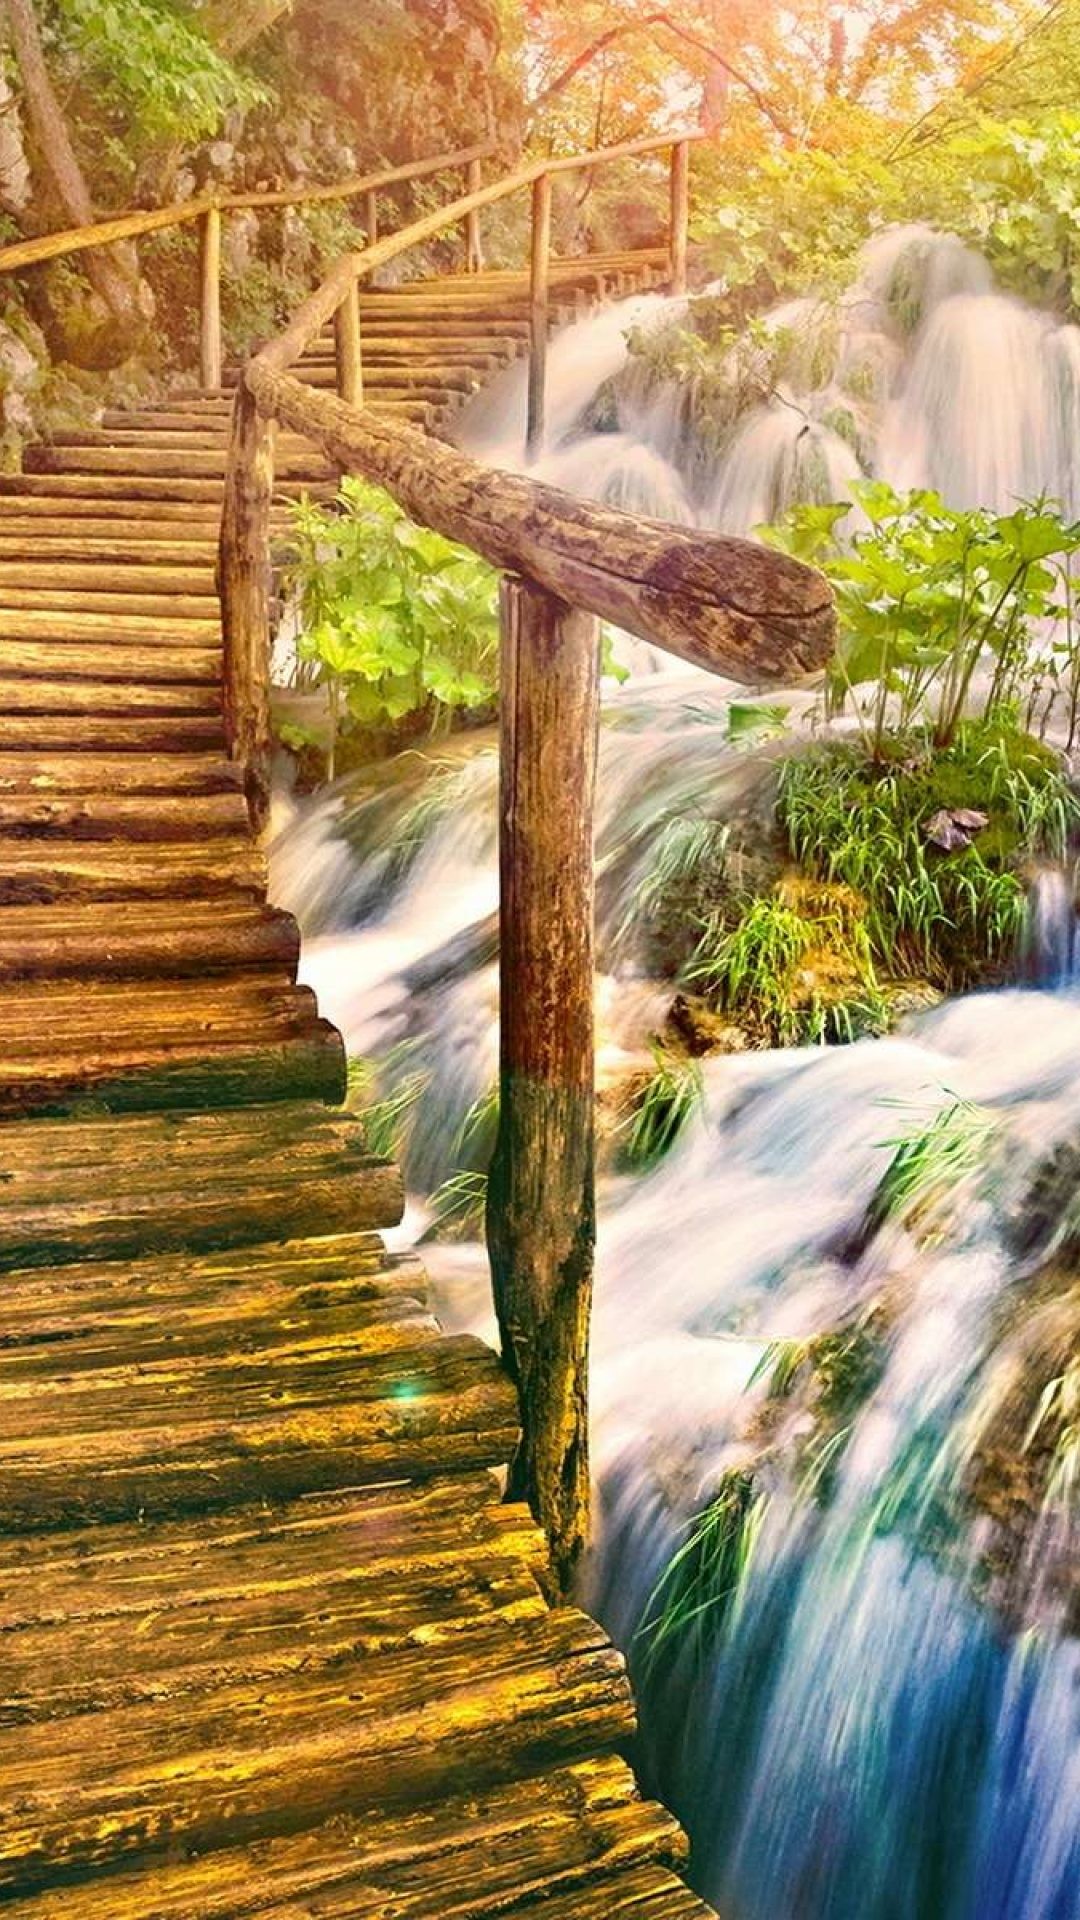 3d nature wallpaper for mobile phone,nature,natural landscape,water,water resources,tree